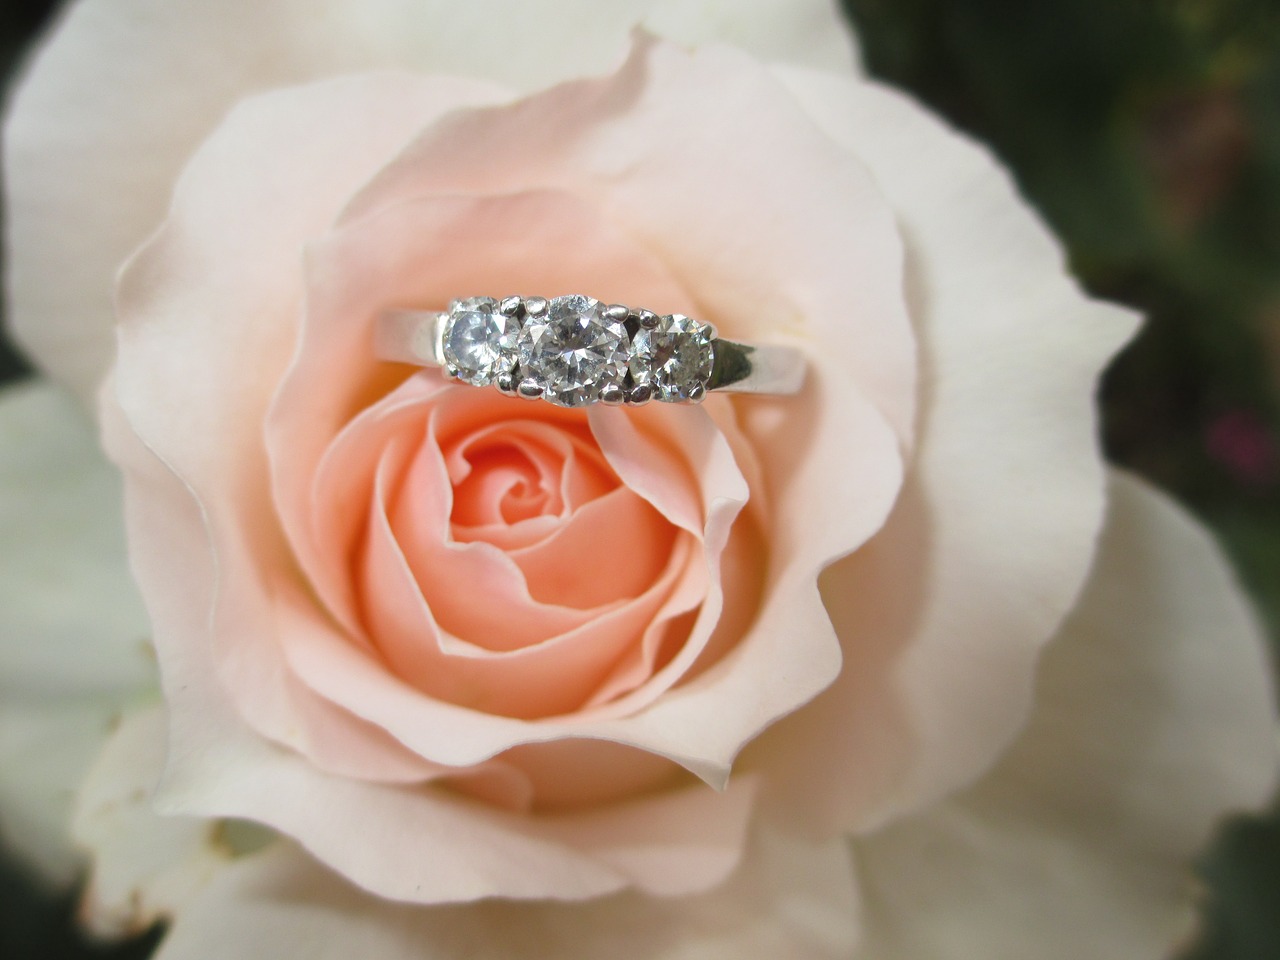 ring engagement ring love free photo